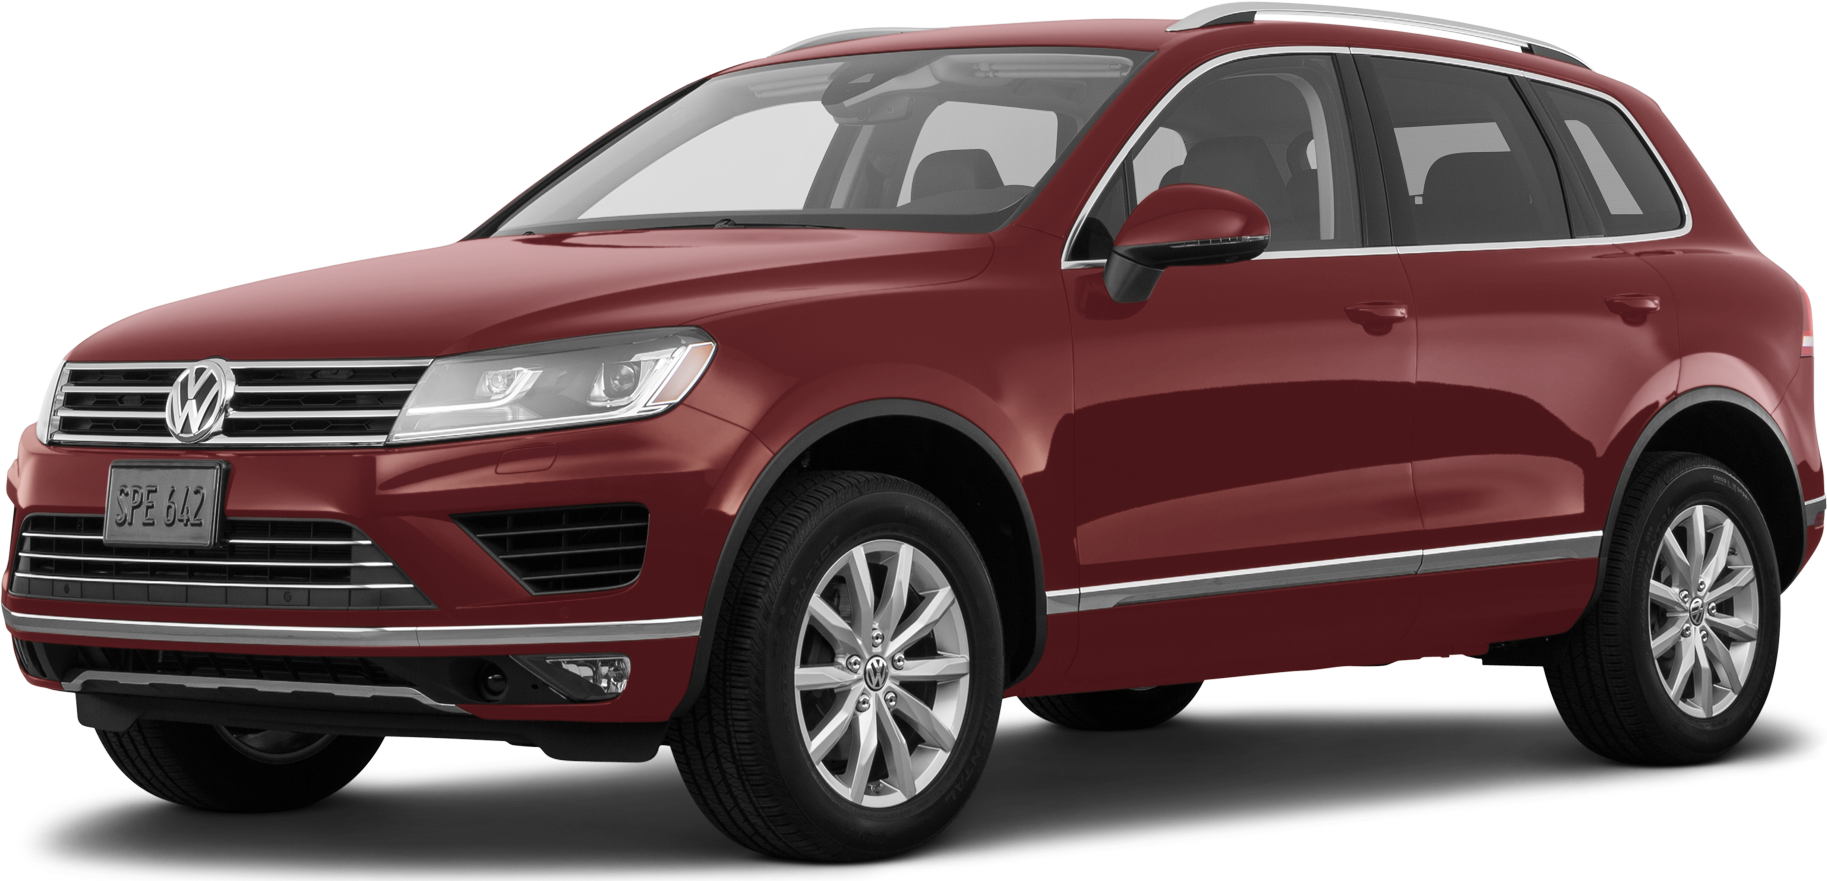 2017 Volkswagen Touareg Price, Value, Ratings & Reviews